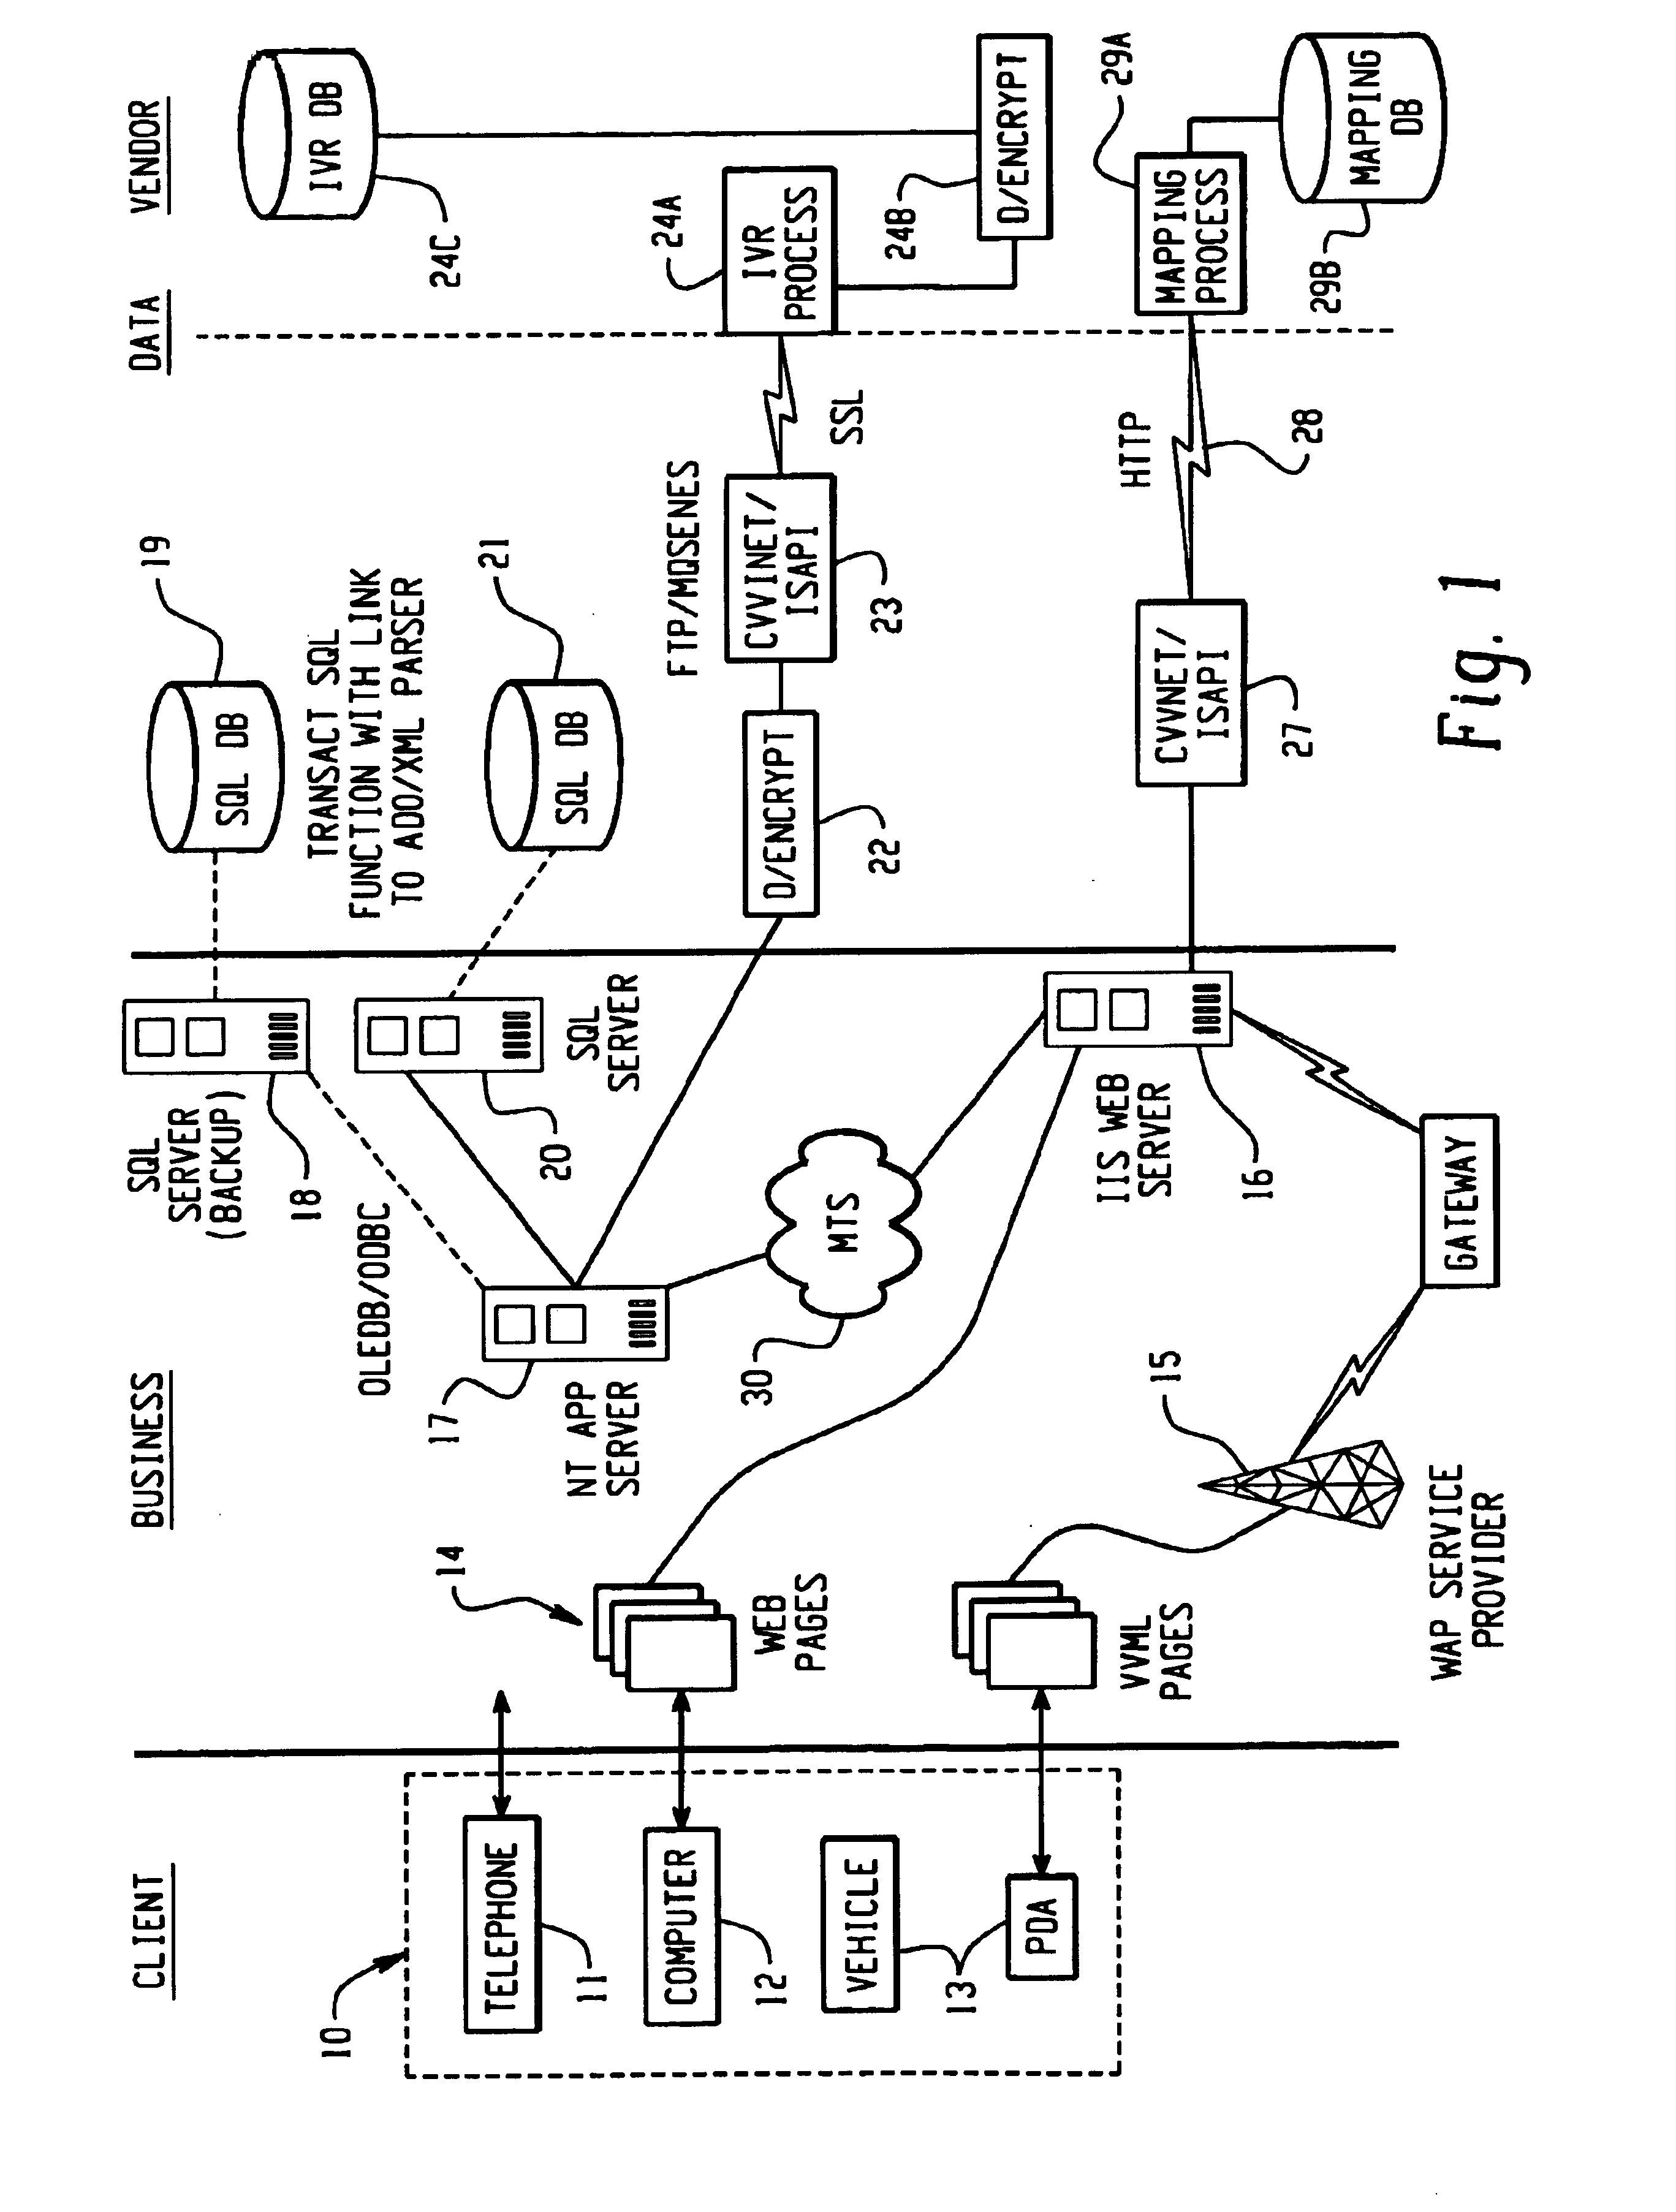 Systems, methods and computer program products for facilitating the sale of commodity-like goods/services